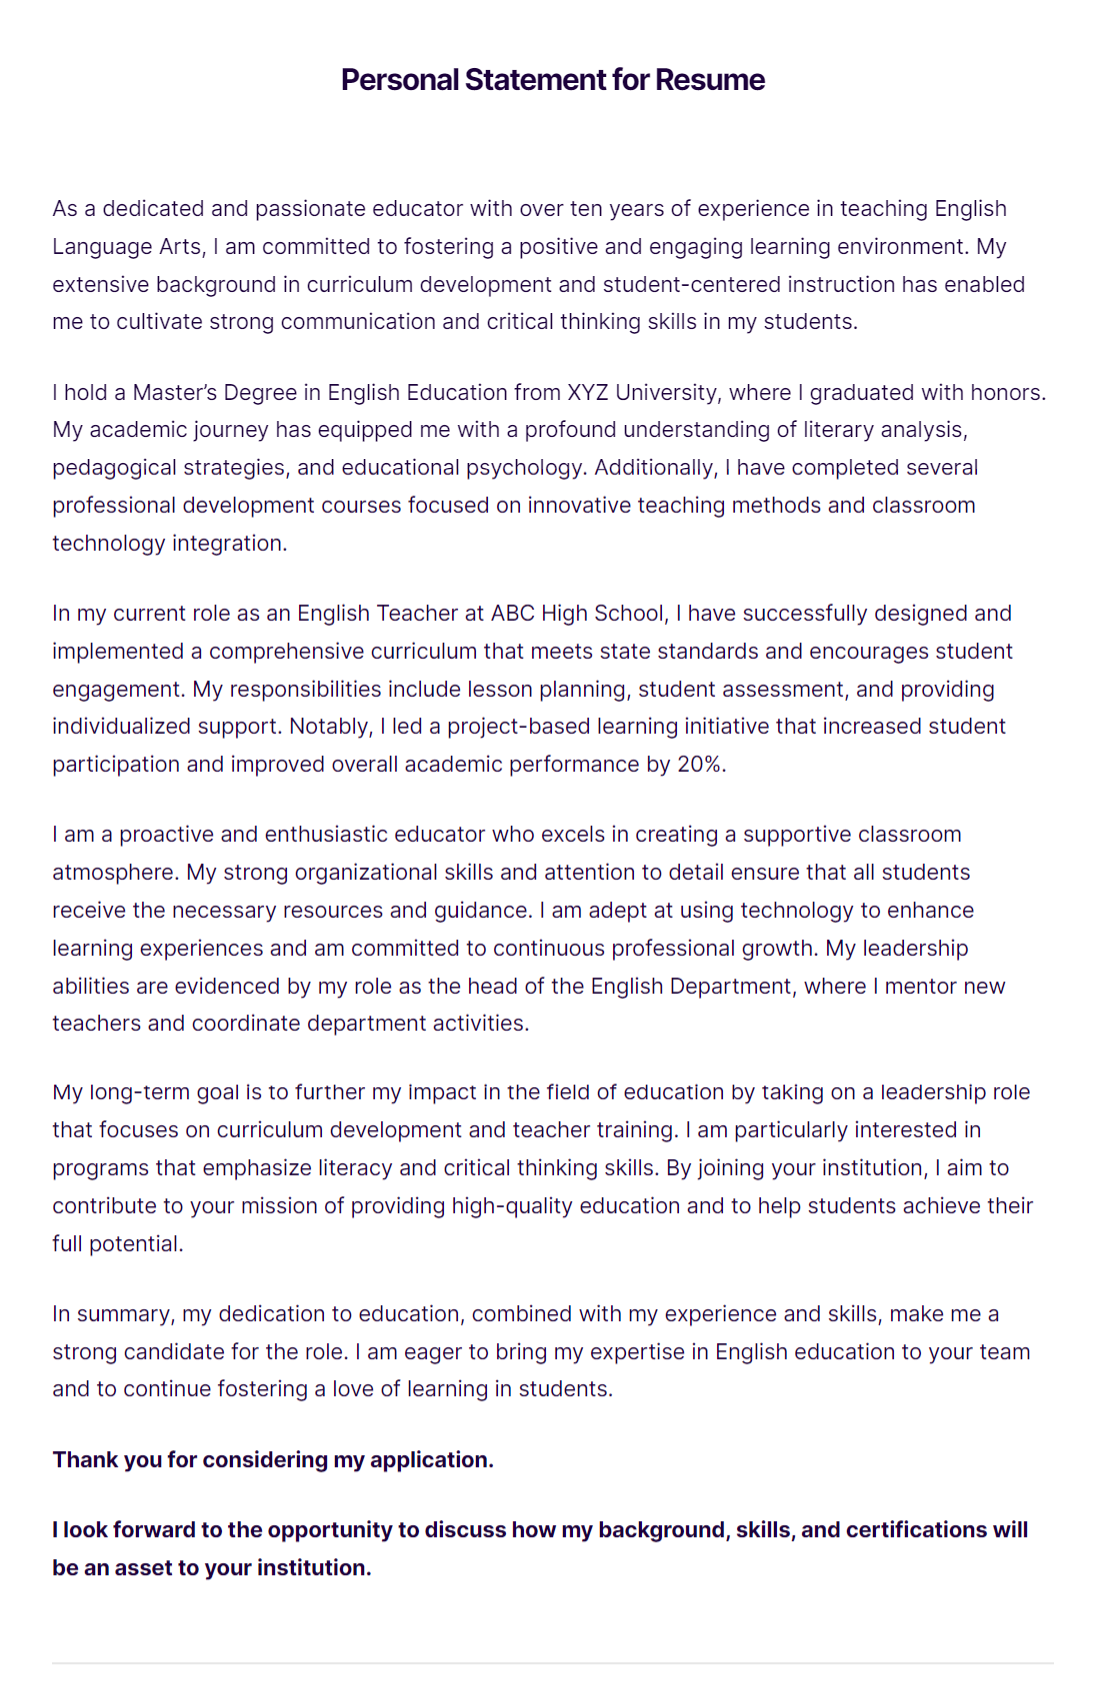 personal-statement-for-resume-html